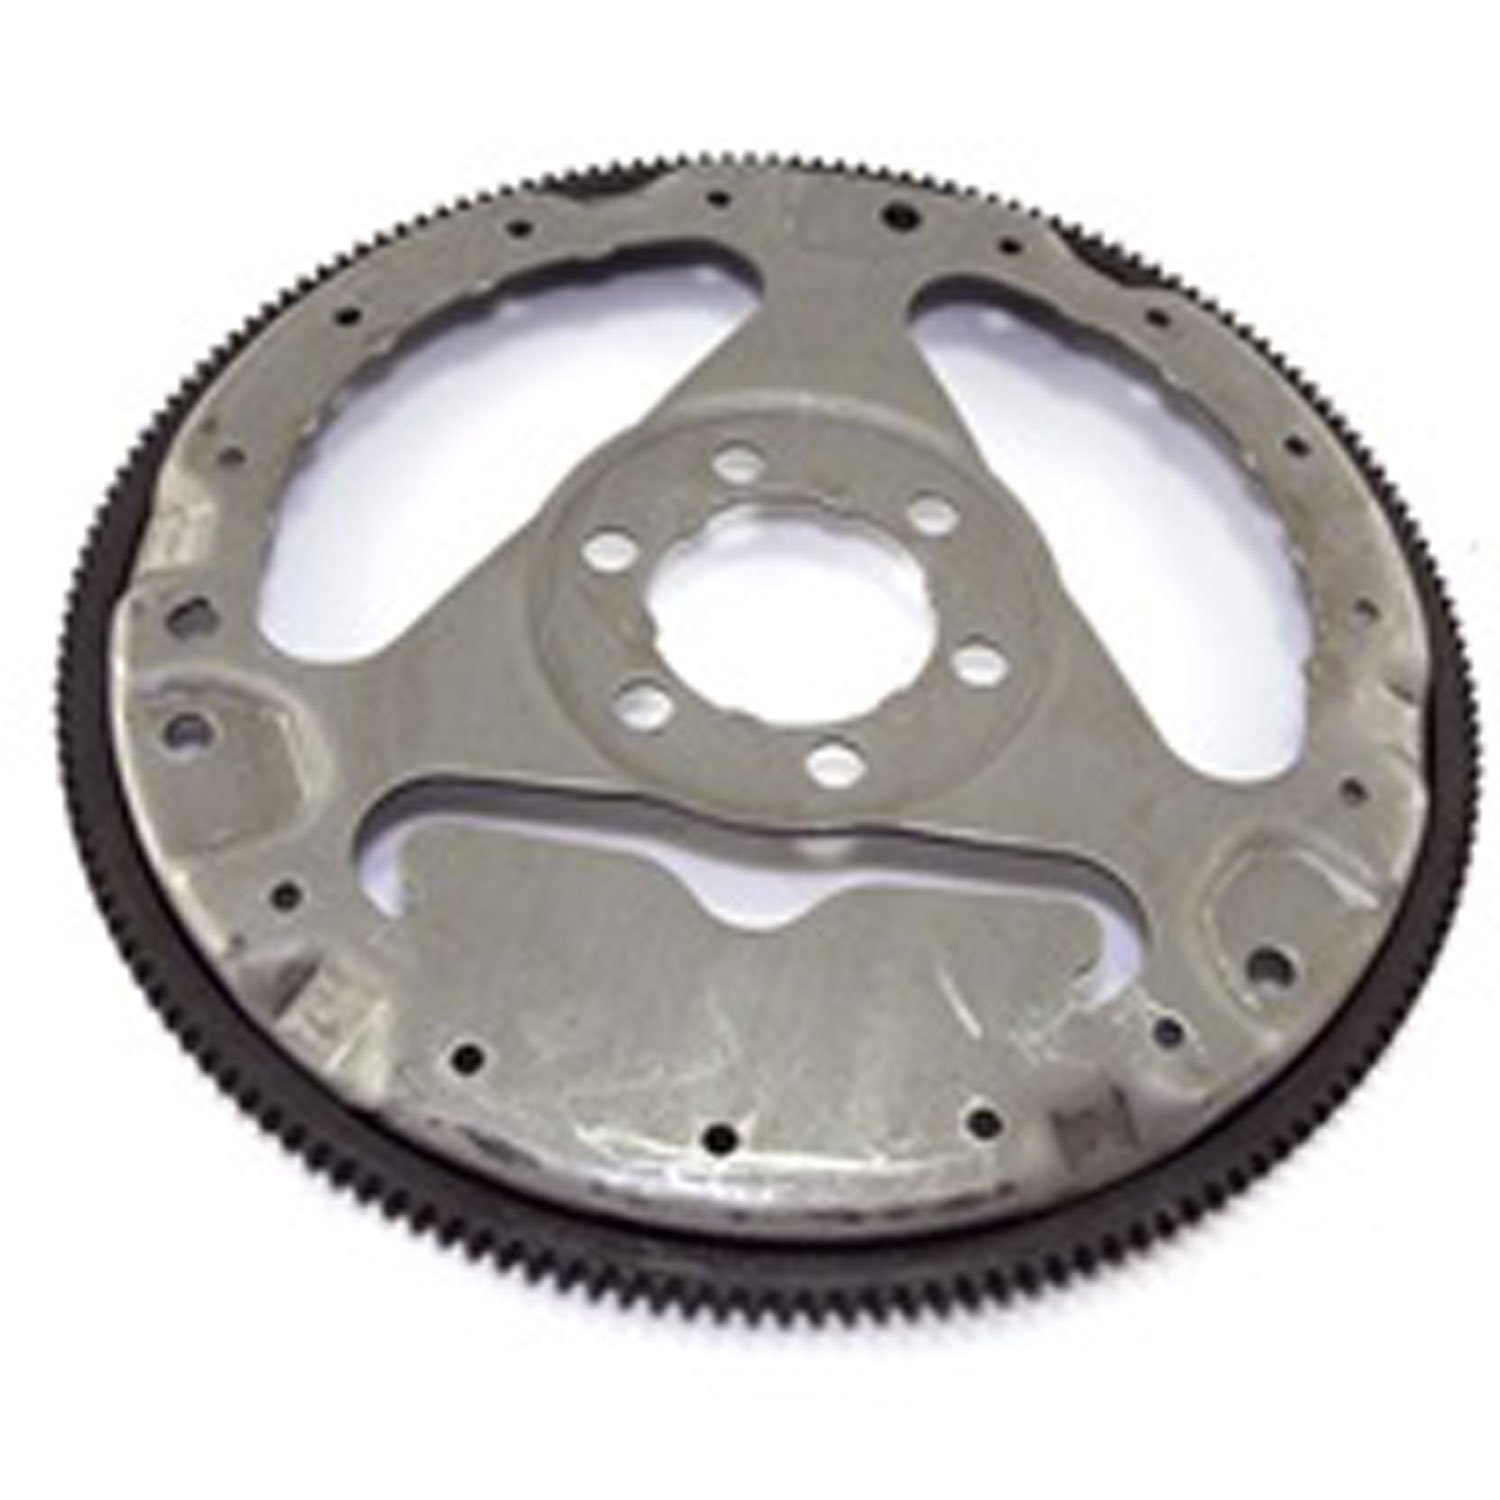 This automatic transmission flexplate from Omix-ADA fits 76-79 Jeep SJ Cherokees and Wagoneers with 360 cubic inch V8 engines.